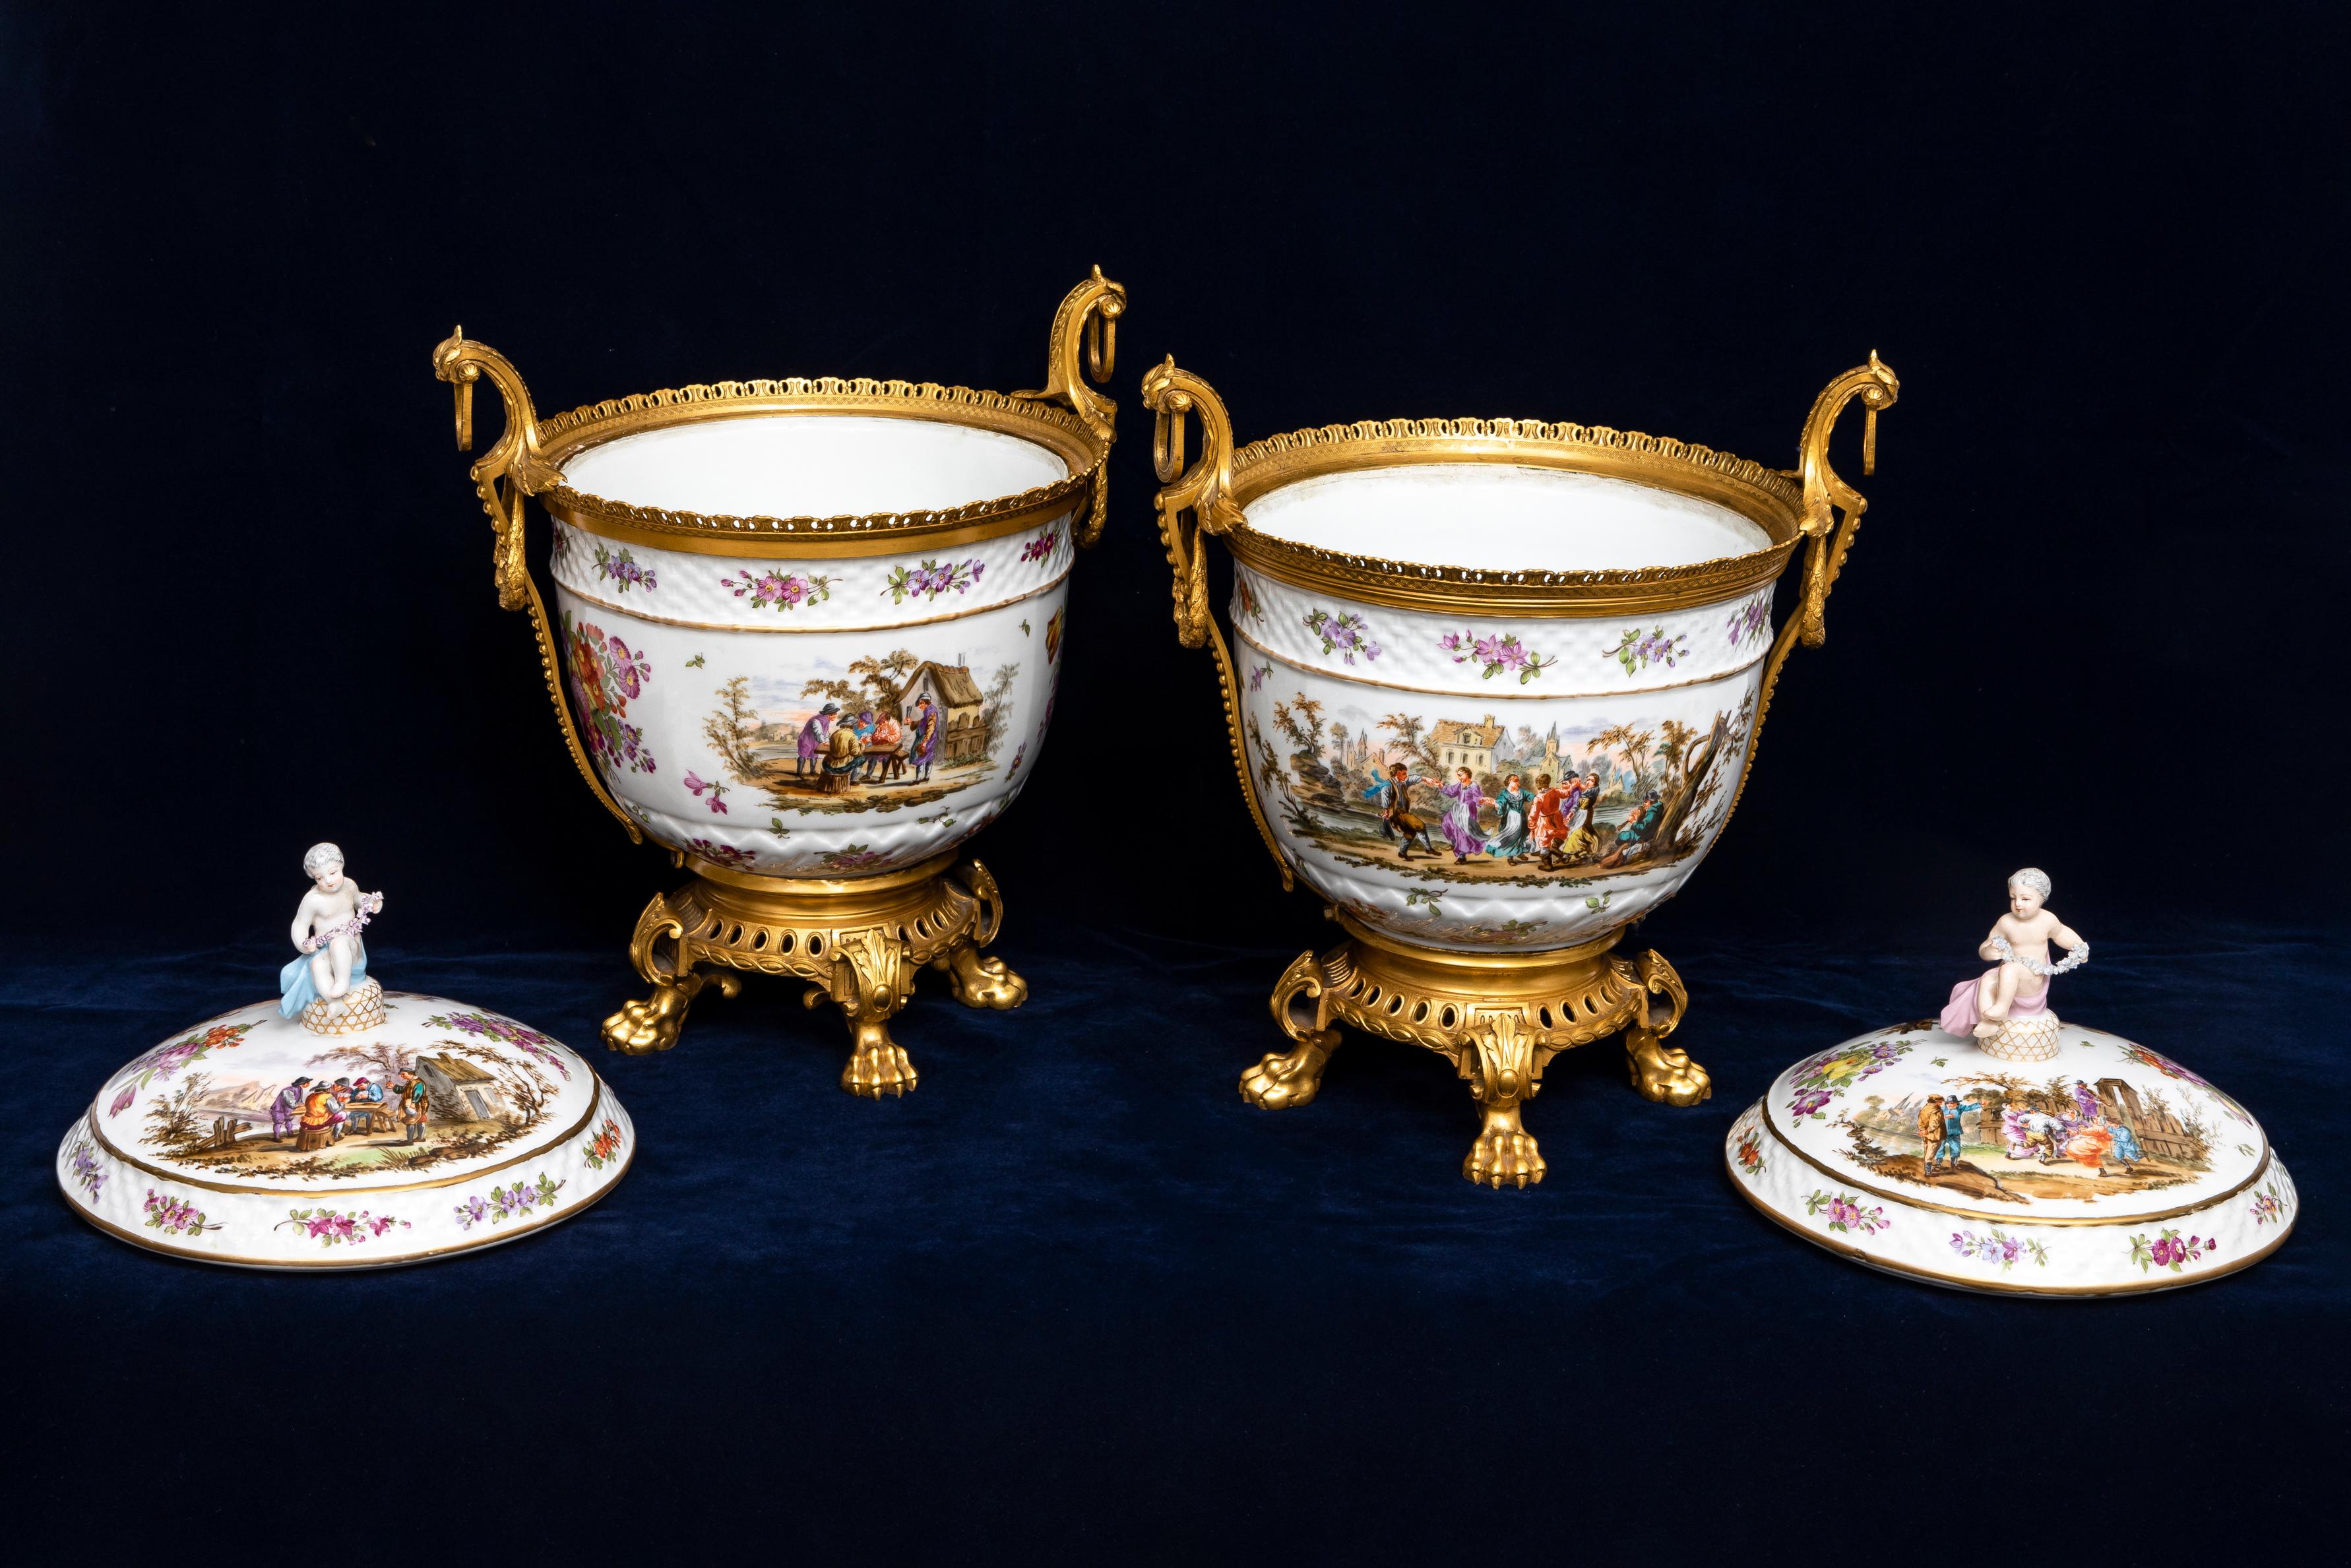 19th Century Pair 18th C. Meissen Porcelain Covered Tureens w/ 19th C. French Ormolu Mounts For Sale